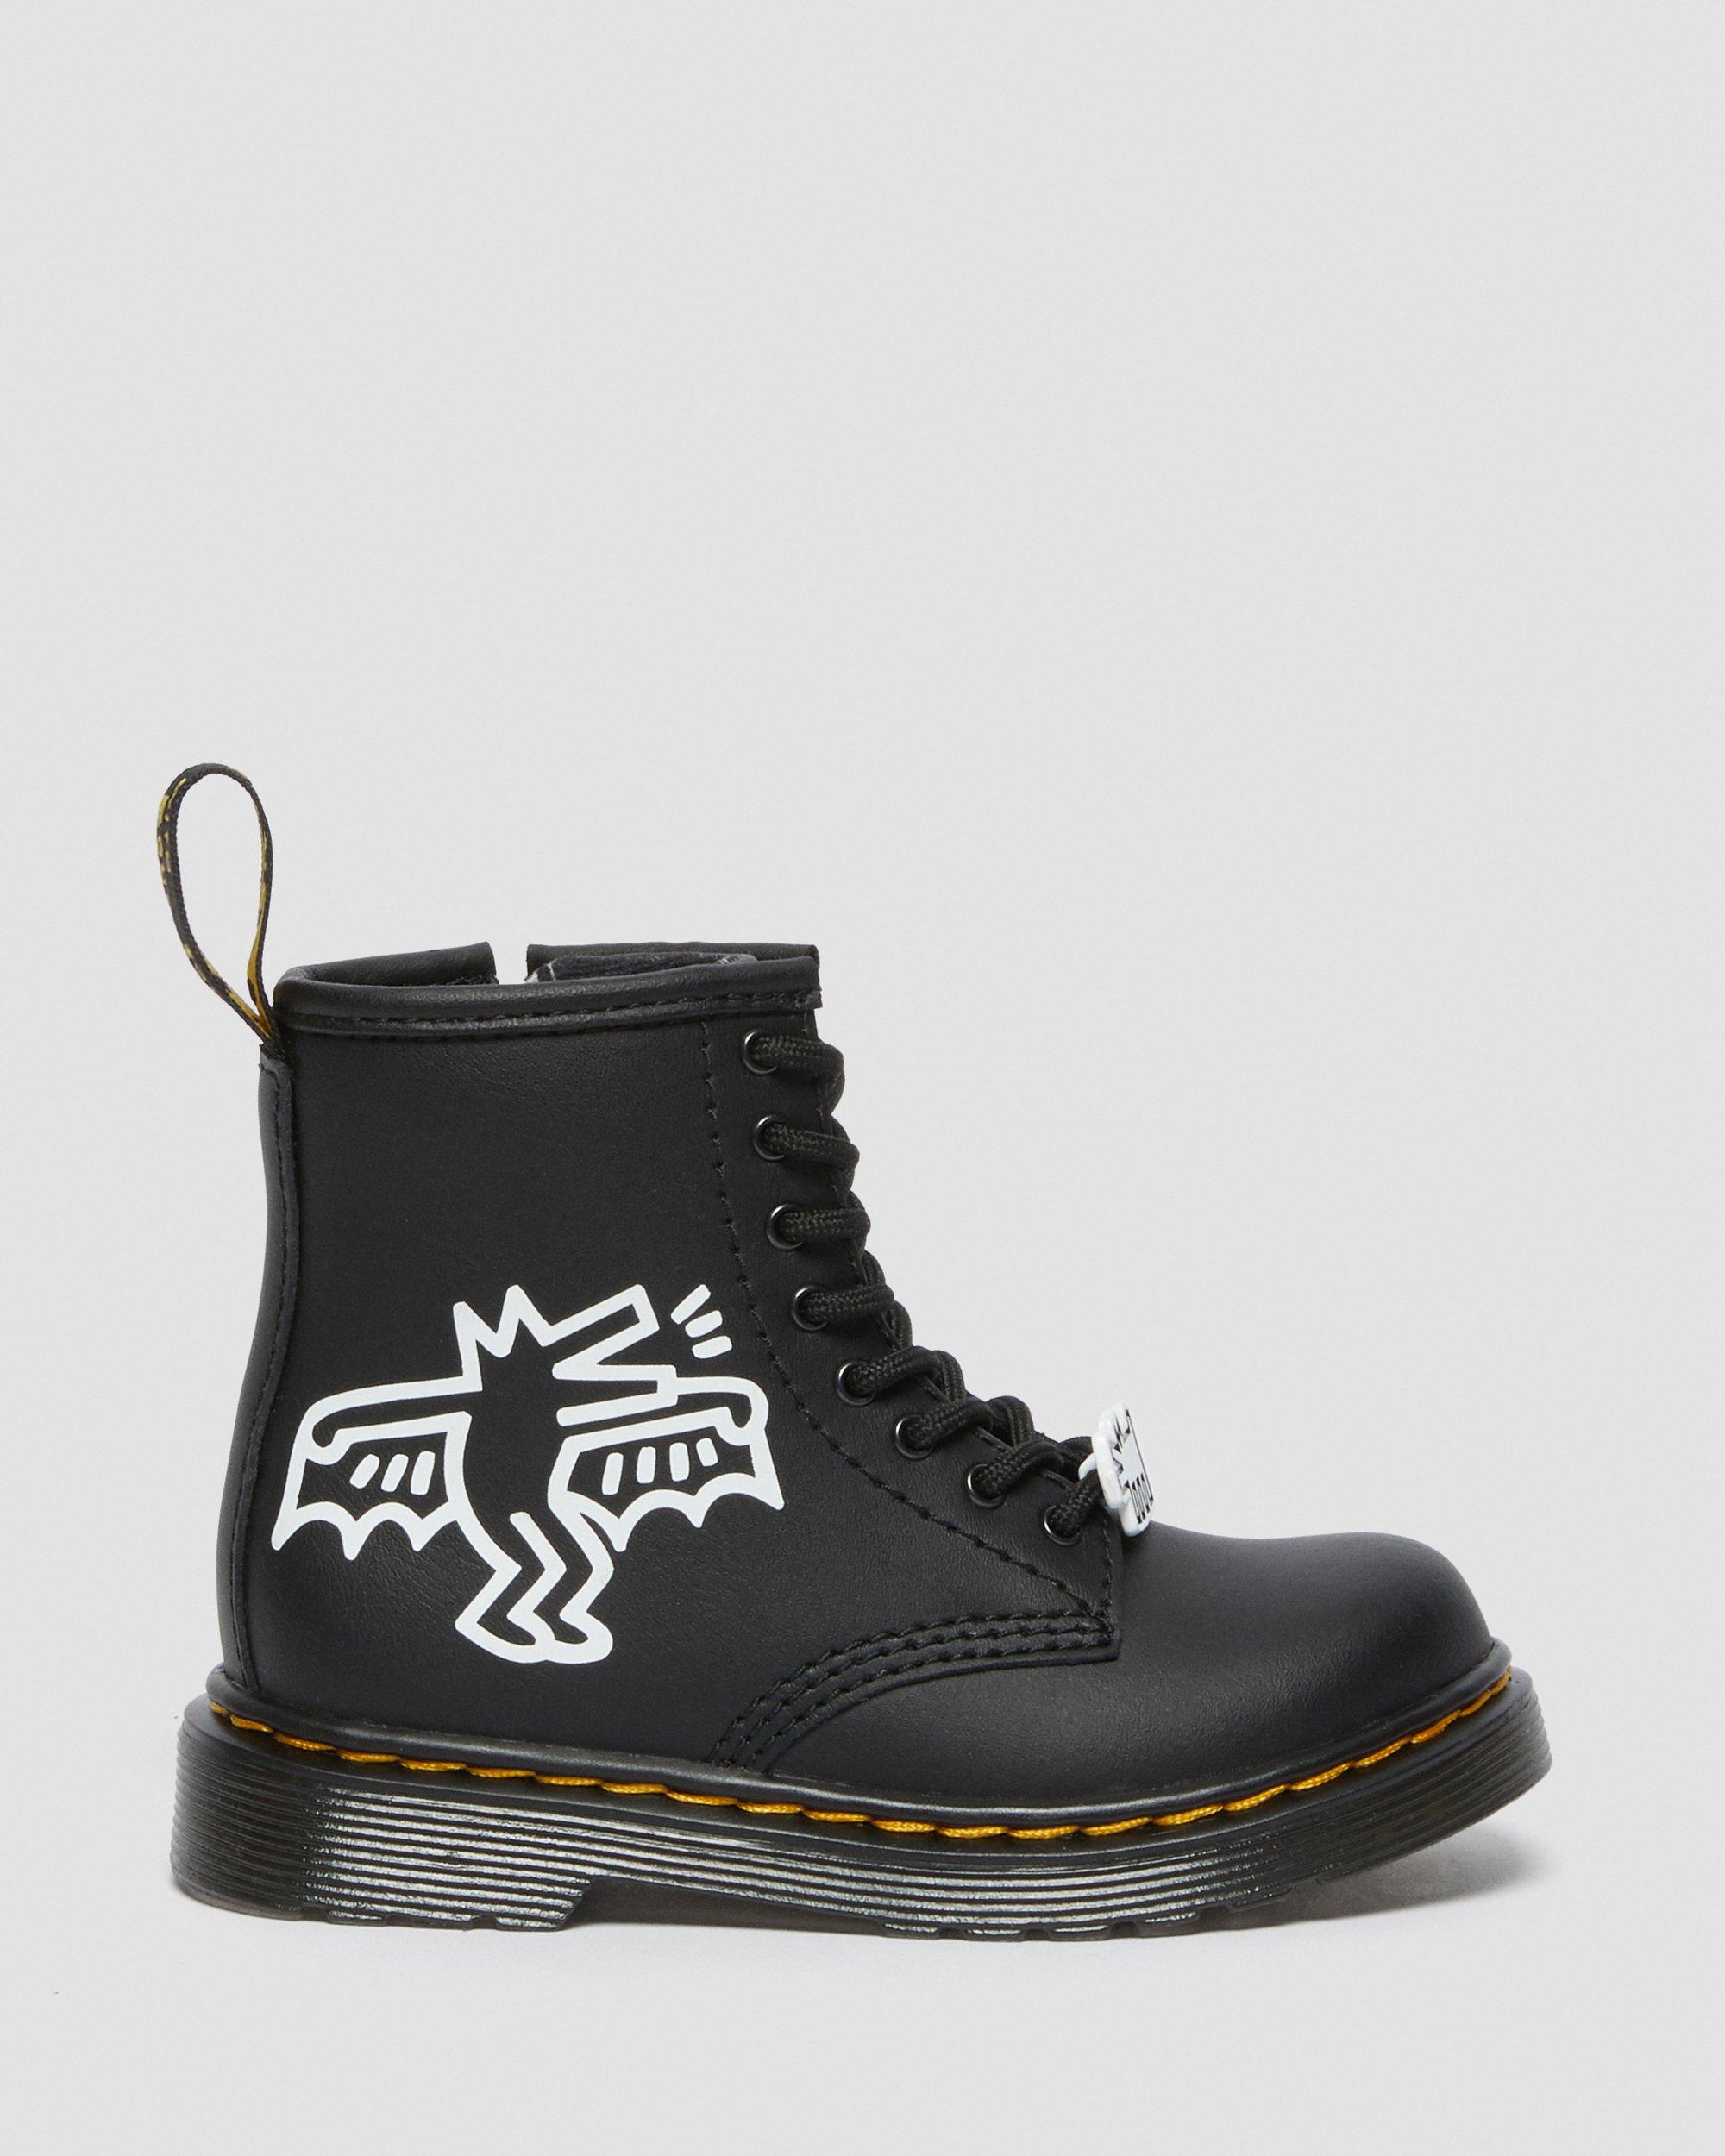 Toddler 1460 Keith Haring Leather Boots in Black+White